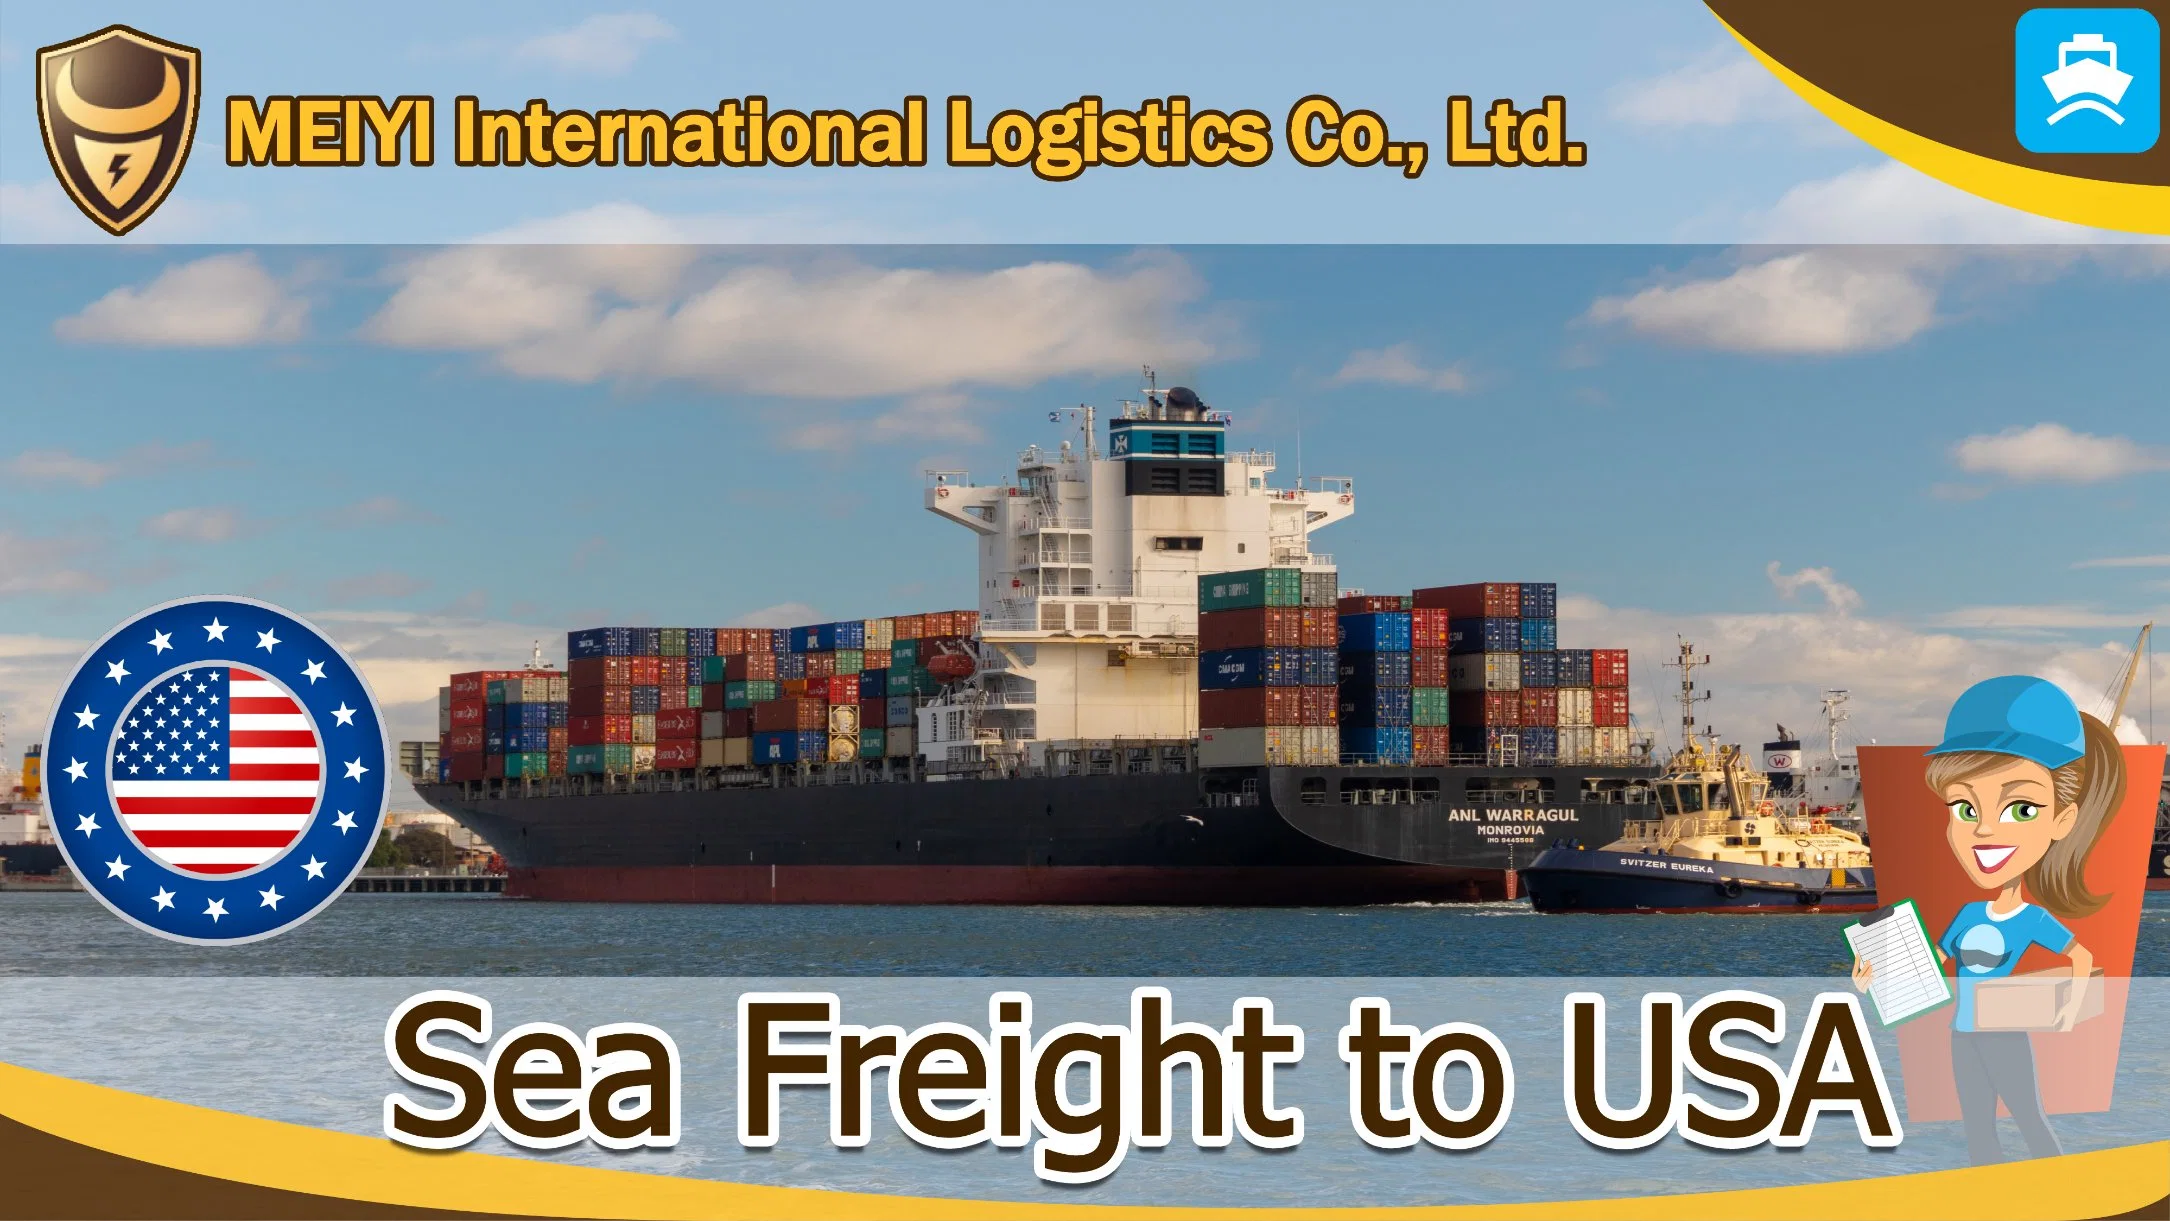 Shipping service from China to Eswatini by sea freight china dhl shipping to south africa china dhl shipping agent clearing and forwarding agent